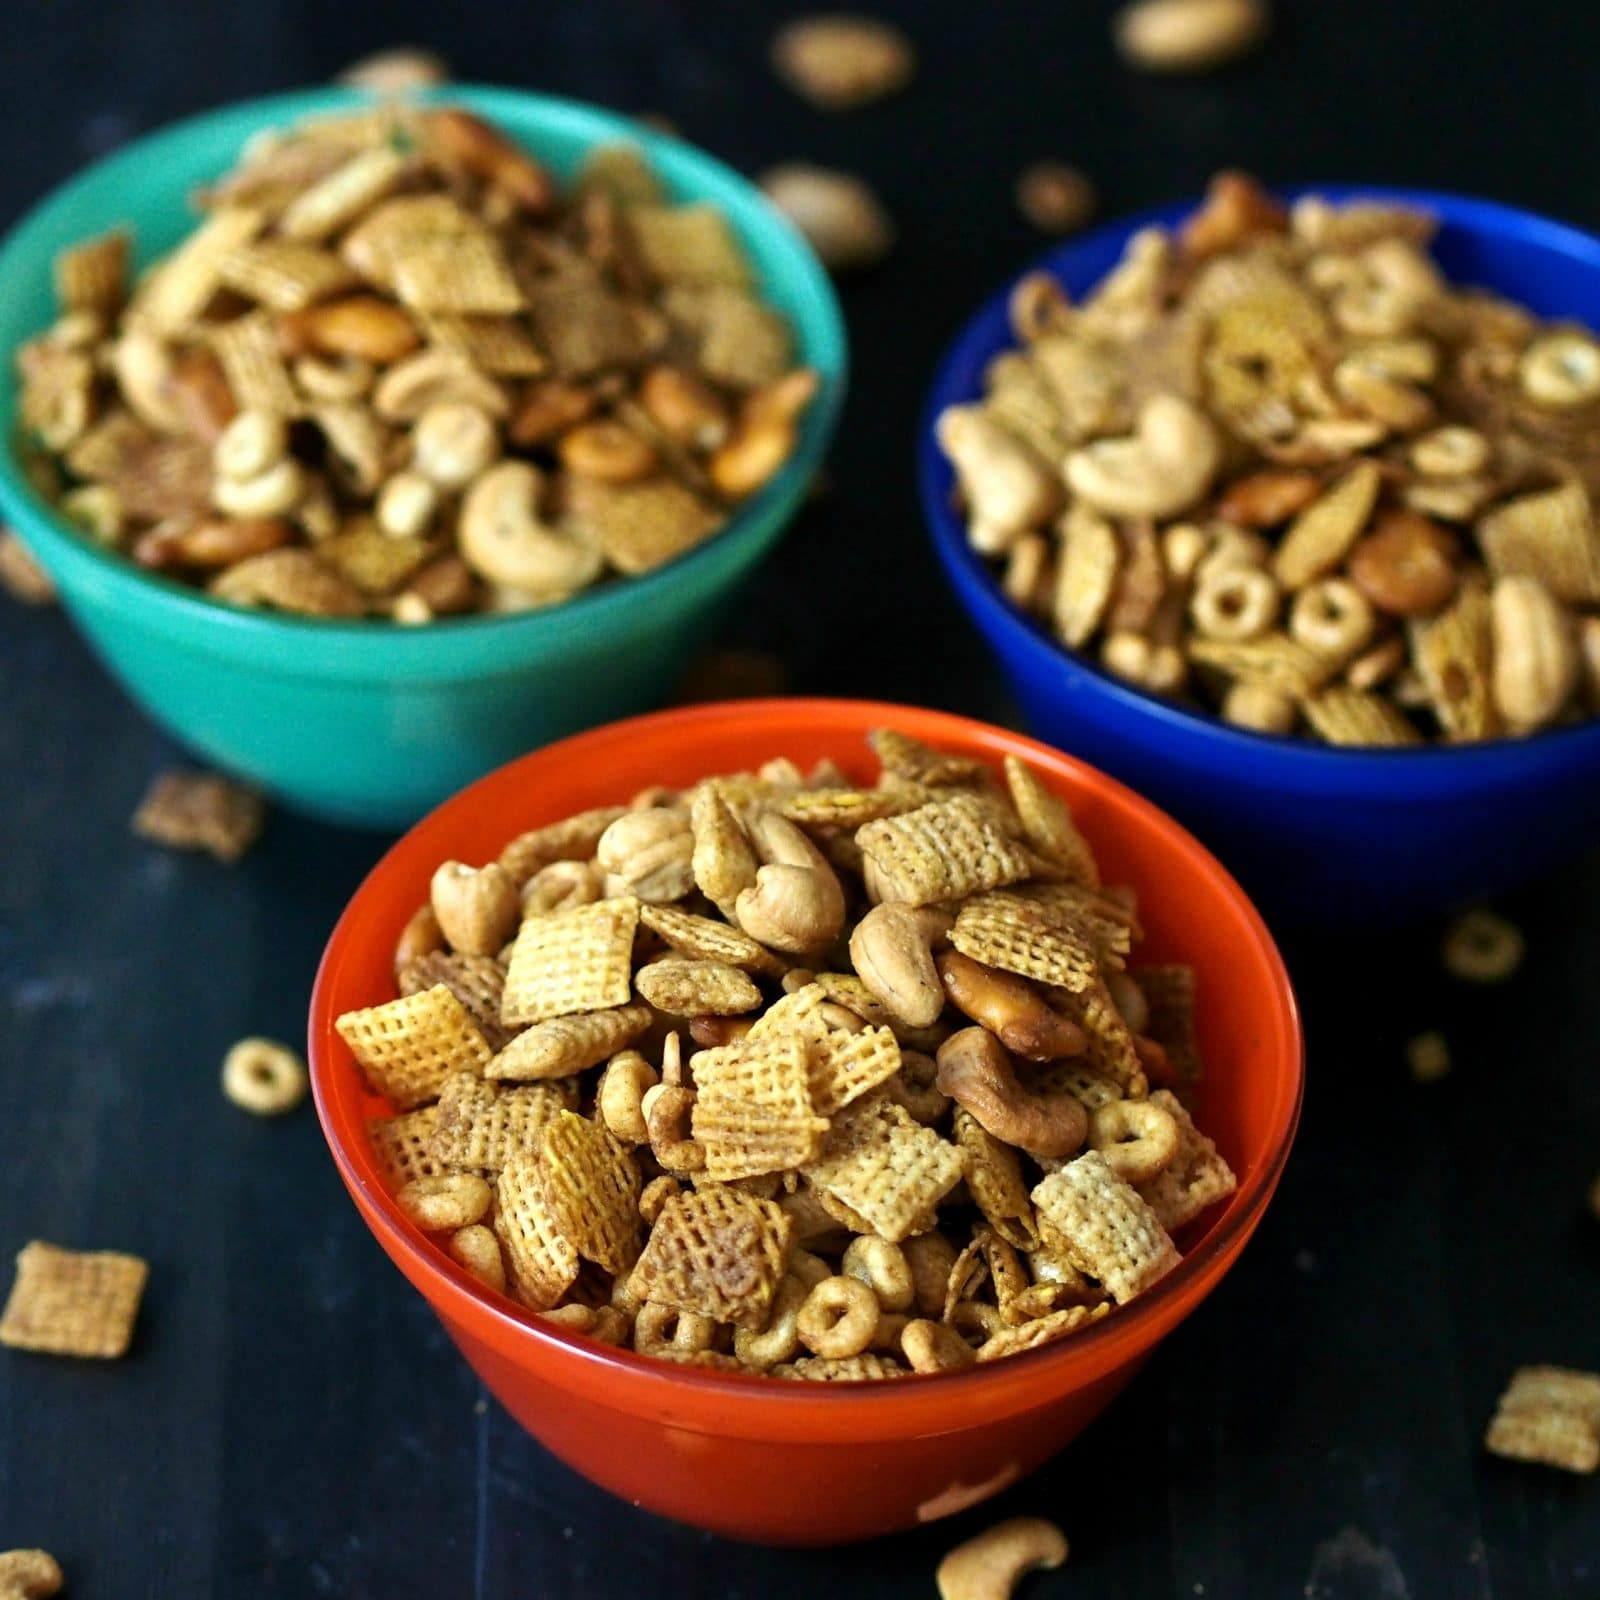 My Famous Chex Party Mix. Original and Honey flavored Chex and Cheerios, cashews and pretzels combined with the perfect seasonings. This stuff is addicting. Simply Sated